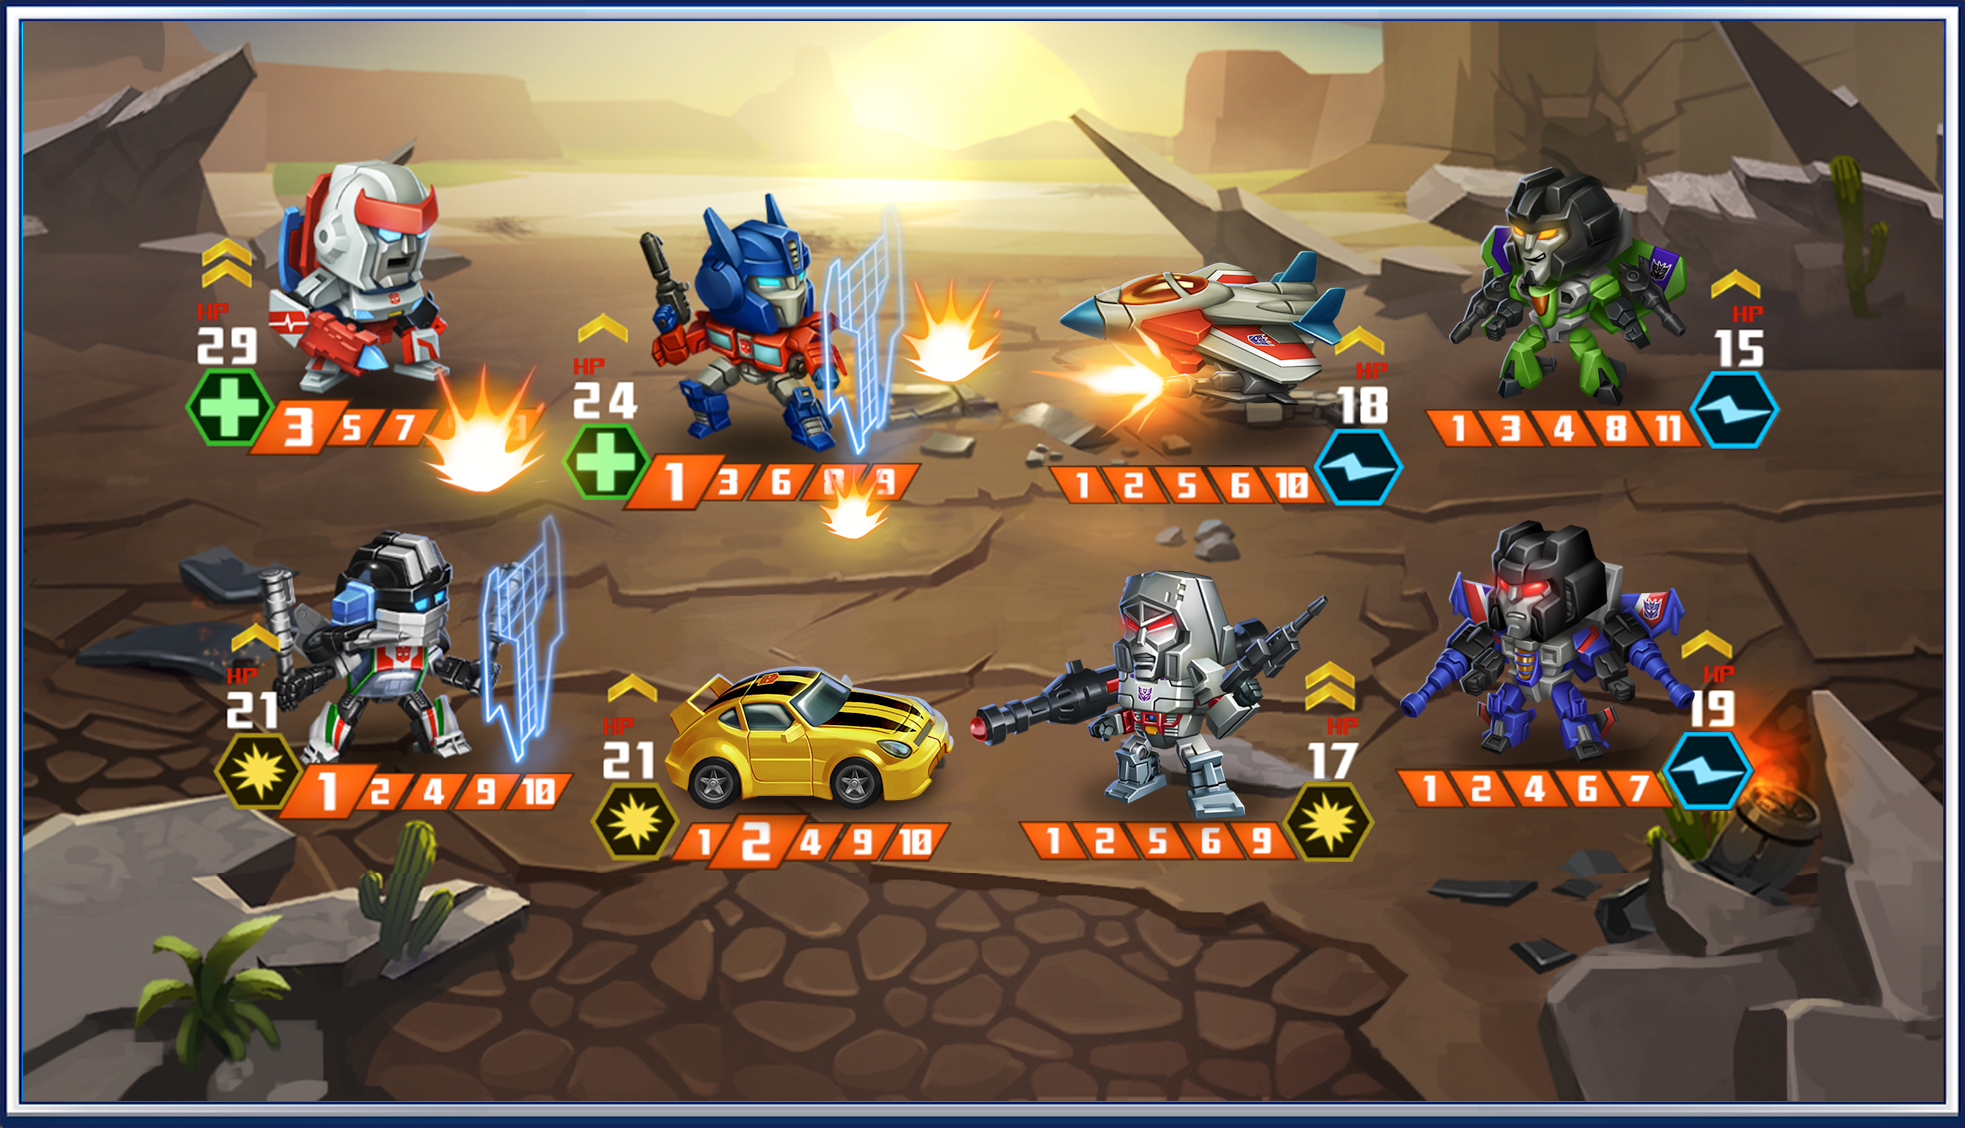 [Jeu Mobile] Transformers - Angry Birds, Forged to Fight, Earth Wars, Bumblebee Overdrive, etc - Page 6 Plain-battle-01